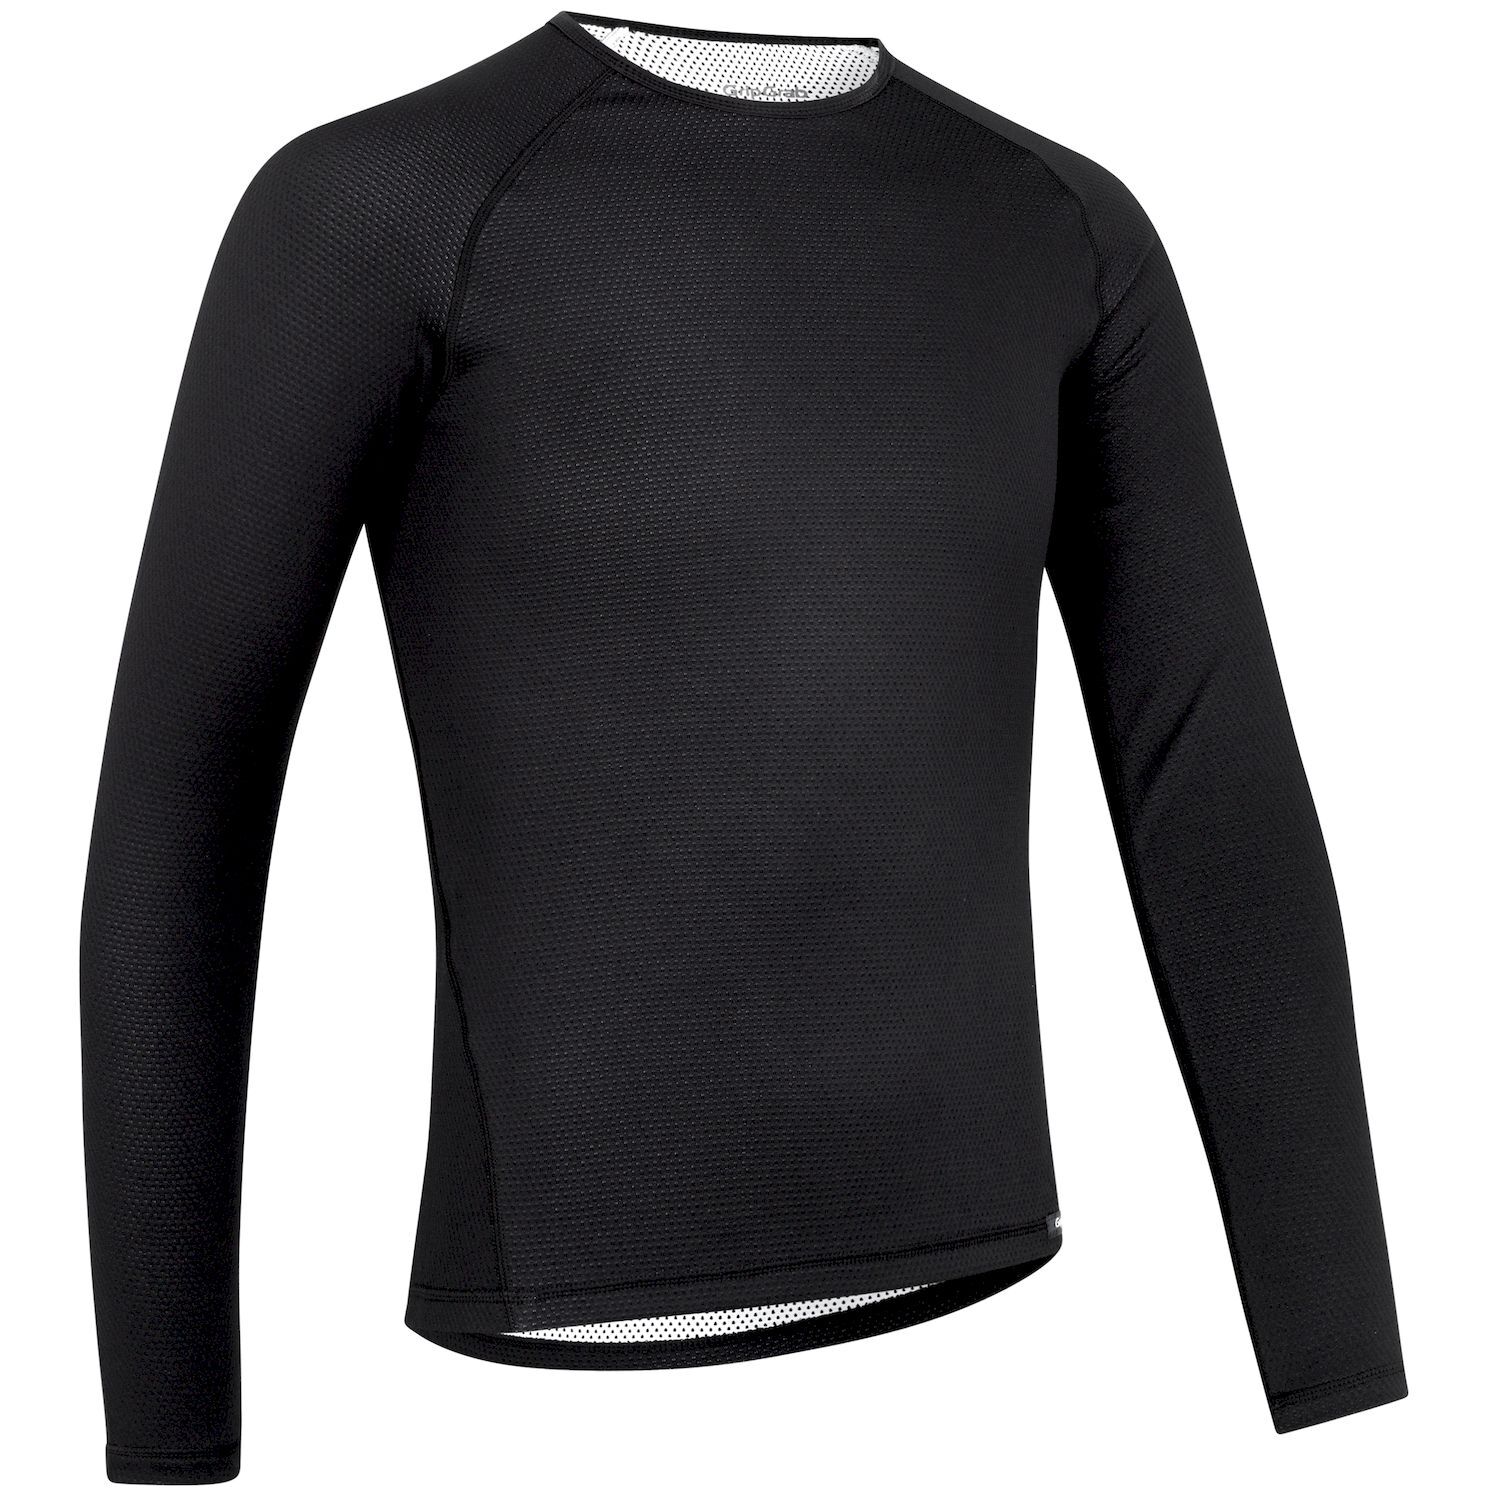 GripGrab Ride Thermal Long Sleeve Base Layer - Sous-vêtement thermique